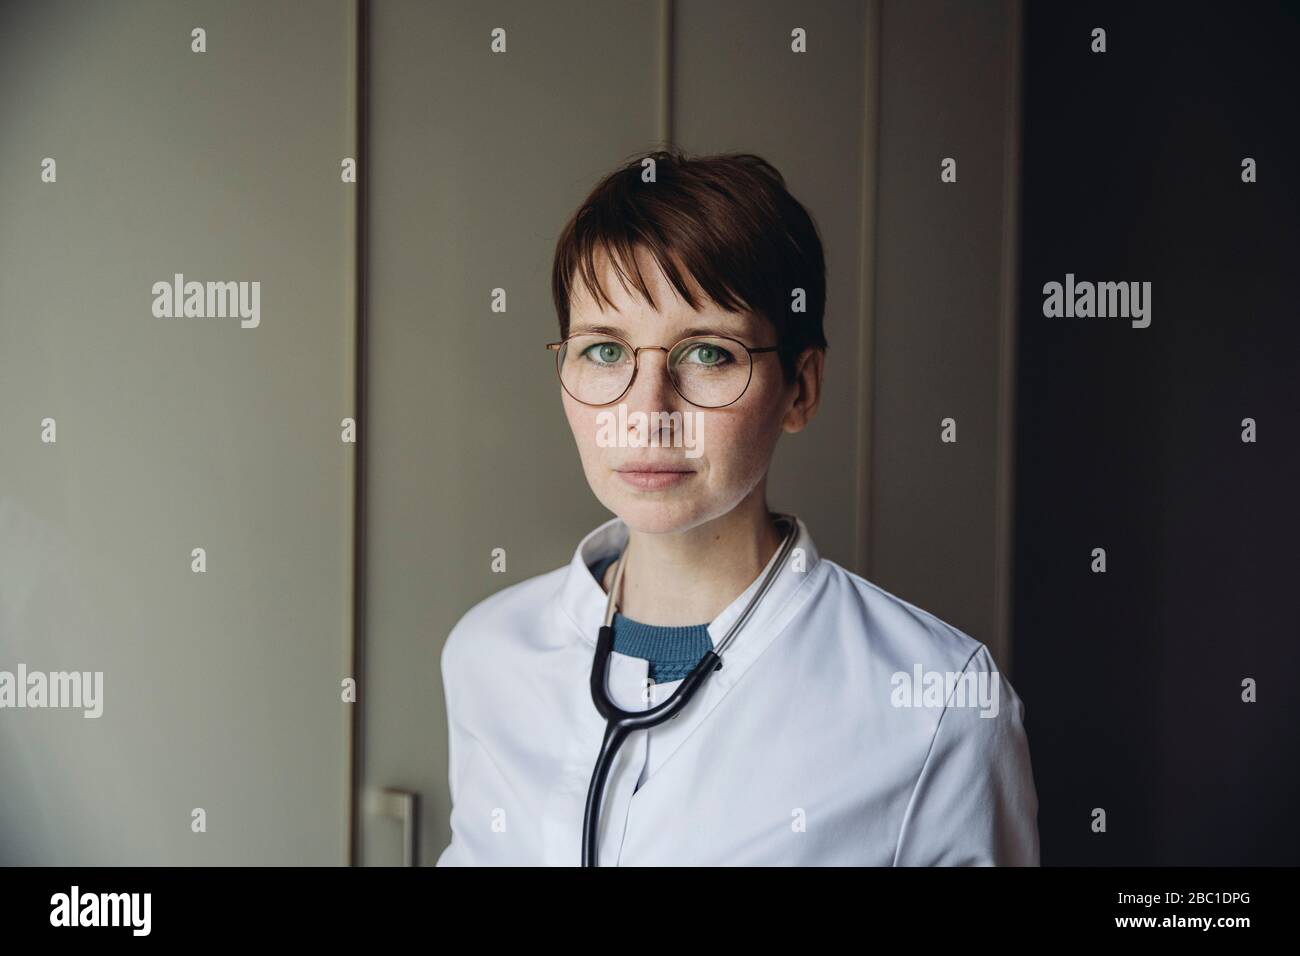 Portrit of female doctor with stethoscope Stock Photo